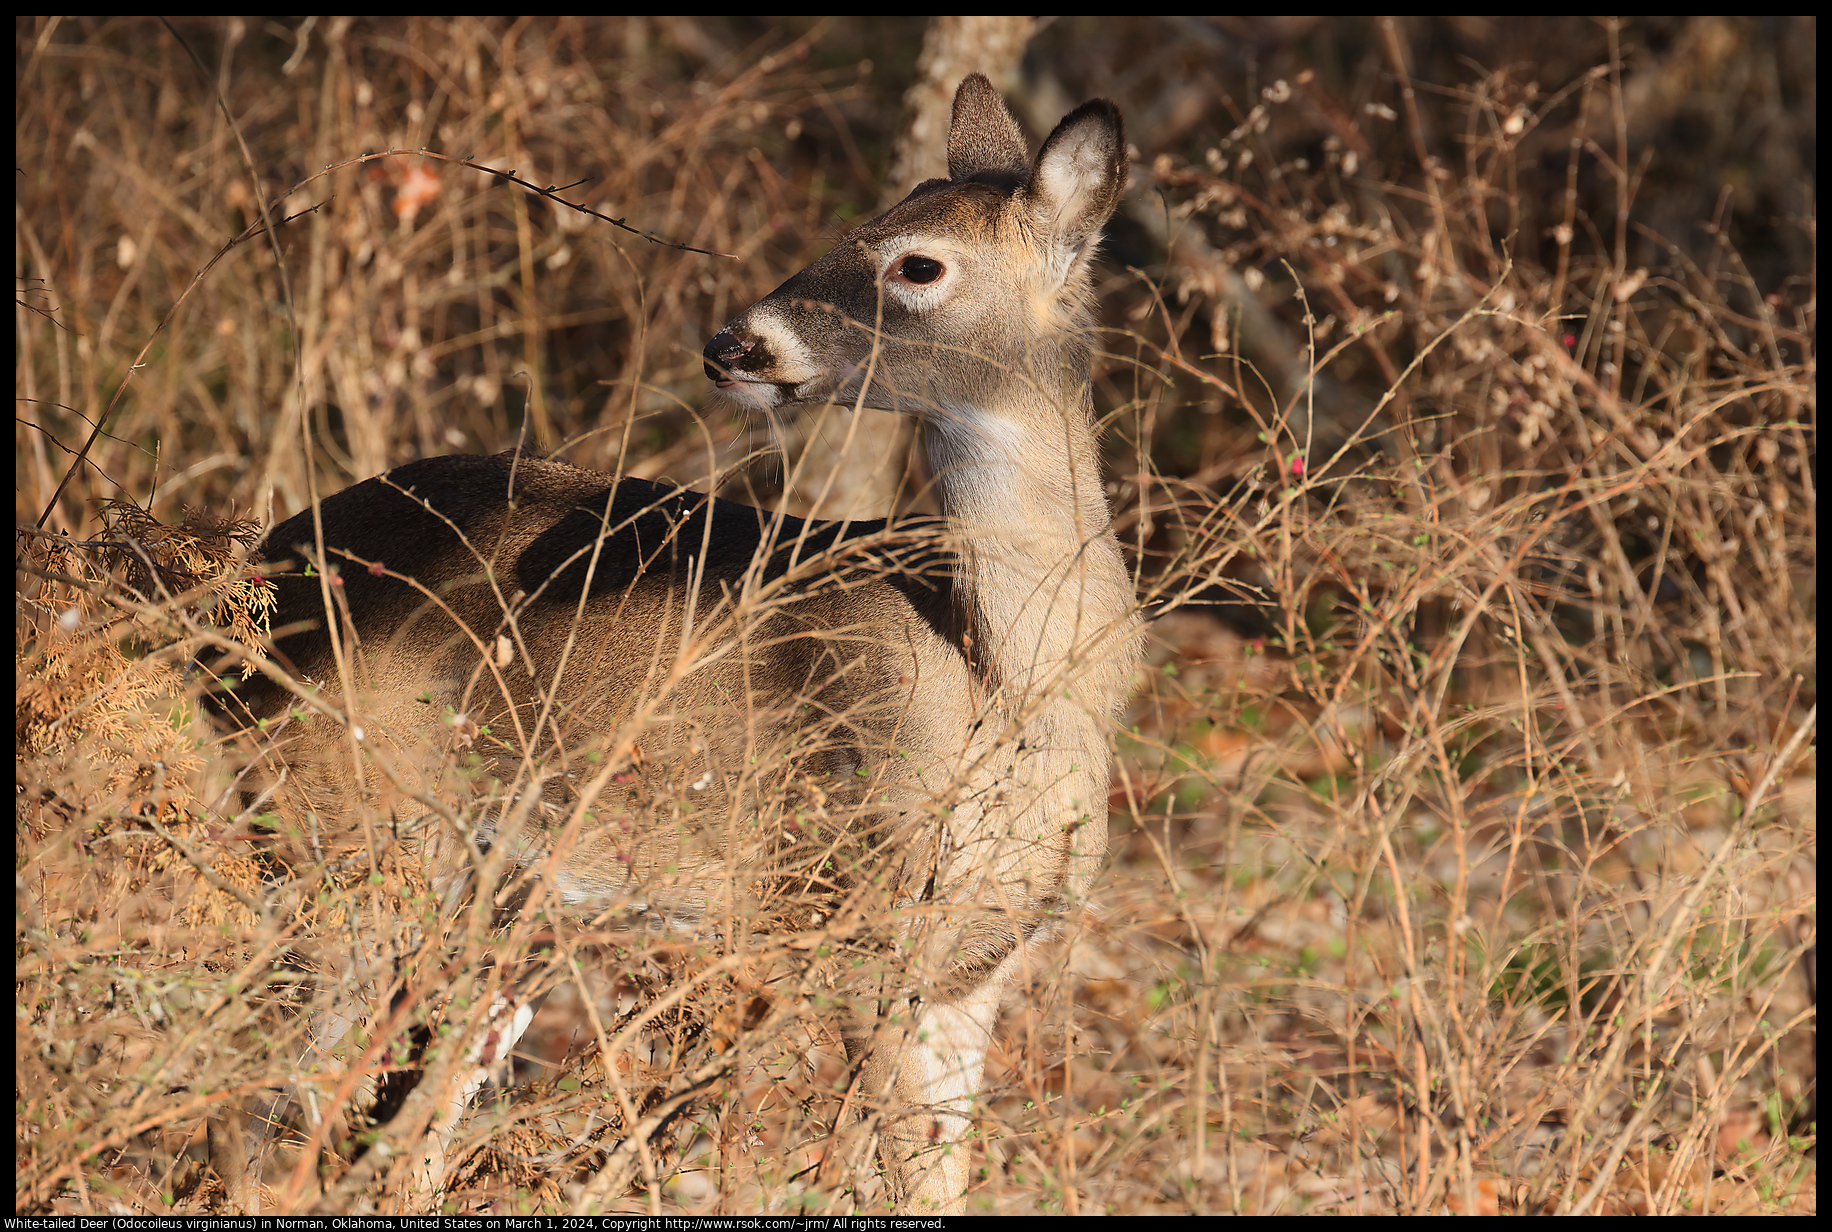 White-tailed Deer (Odocoileus virginianus) in Norman, Oklahoma, United States on March 1, 2024